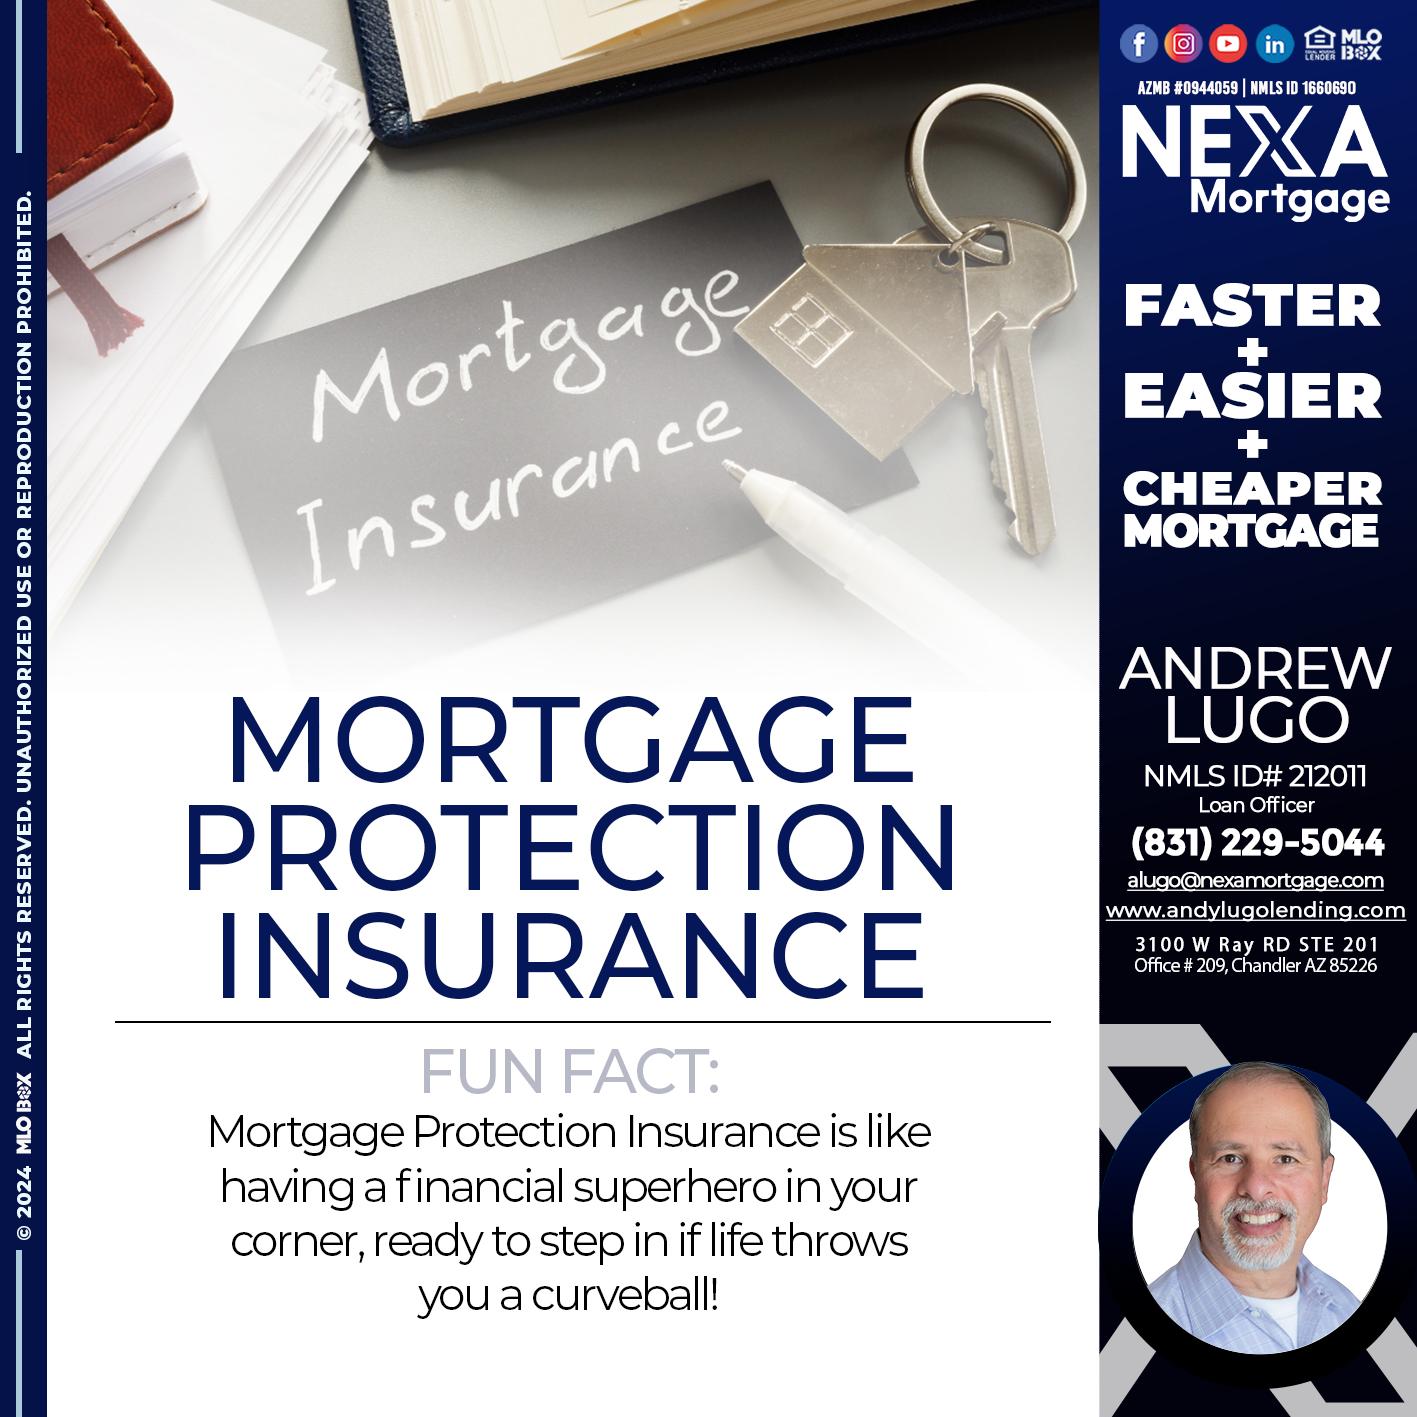 mortgage protection - Andrew Lugo -Loan Officer